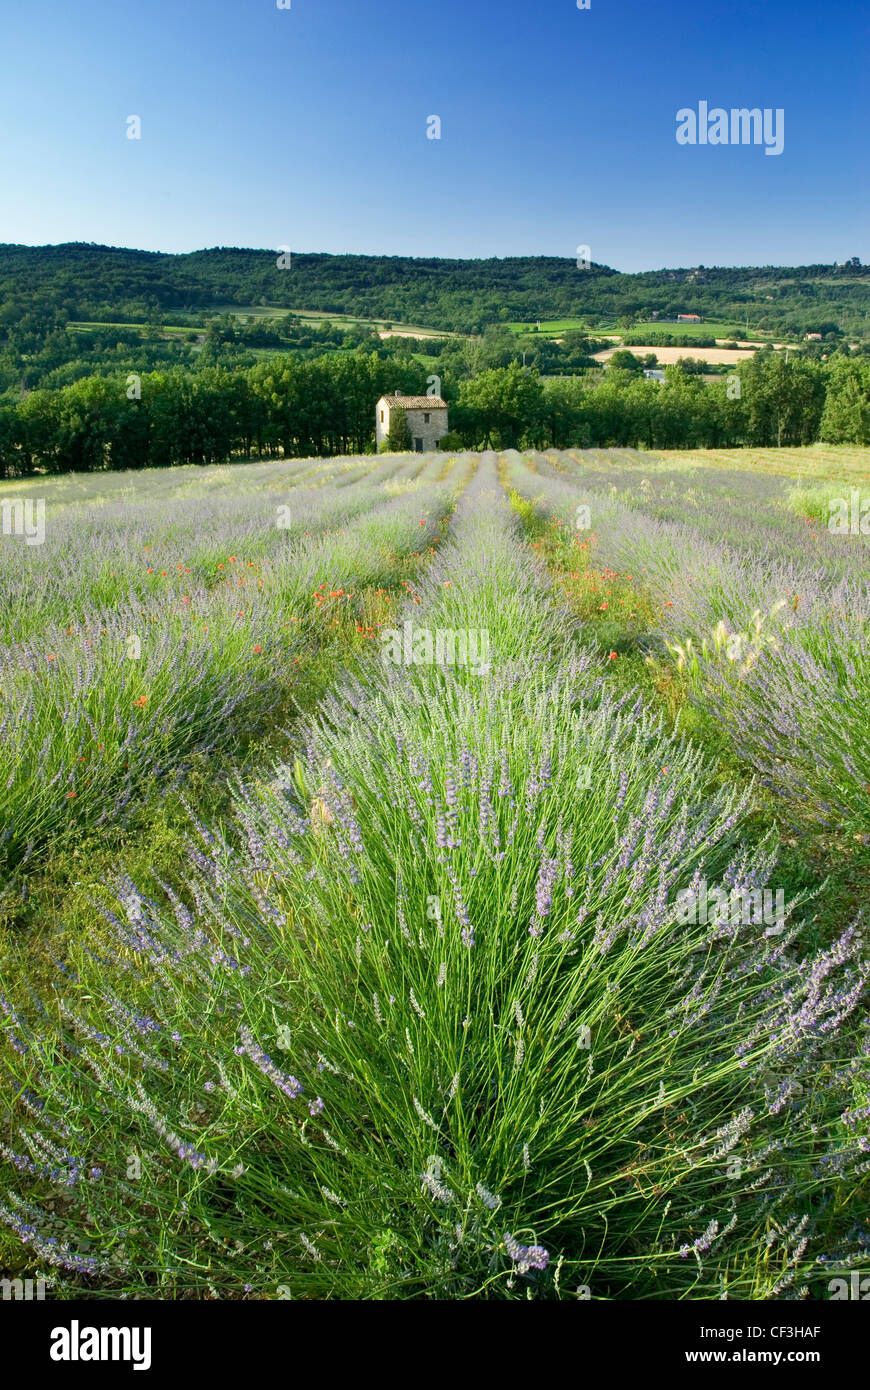 Lavender and a traditional barn in a field beneath blue sky near Apt, the Luberon, Provence, France Stock Photo